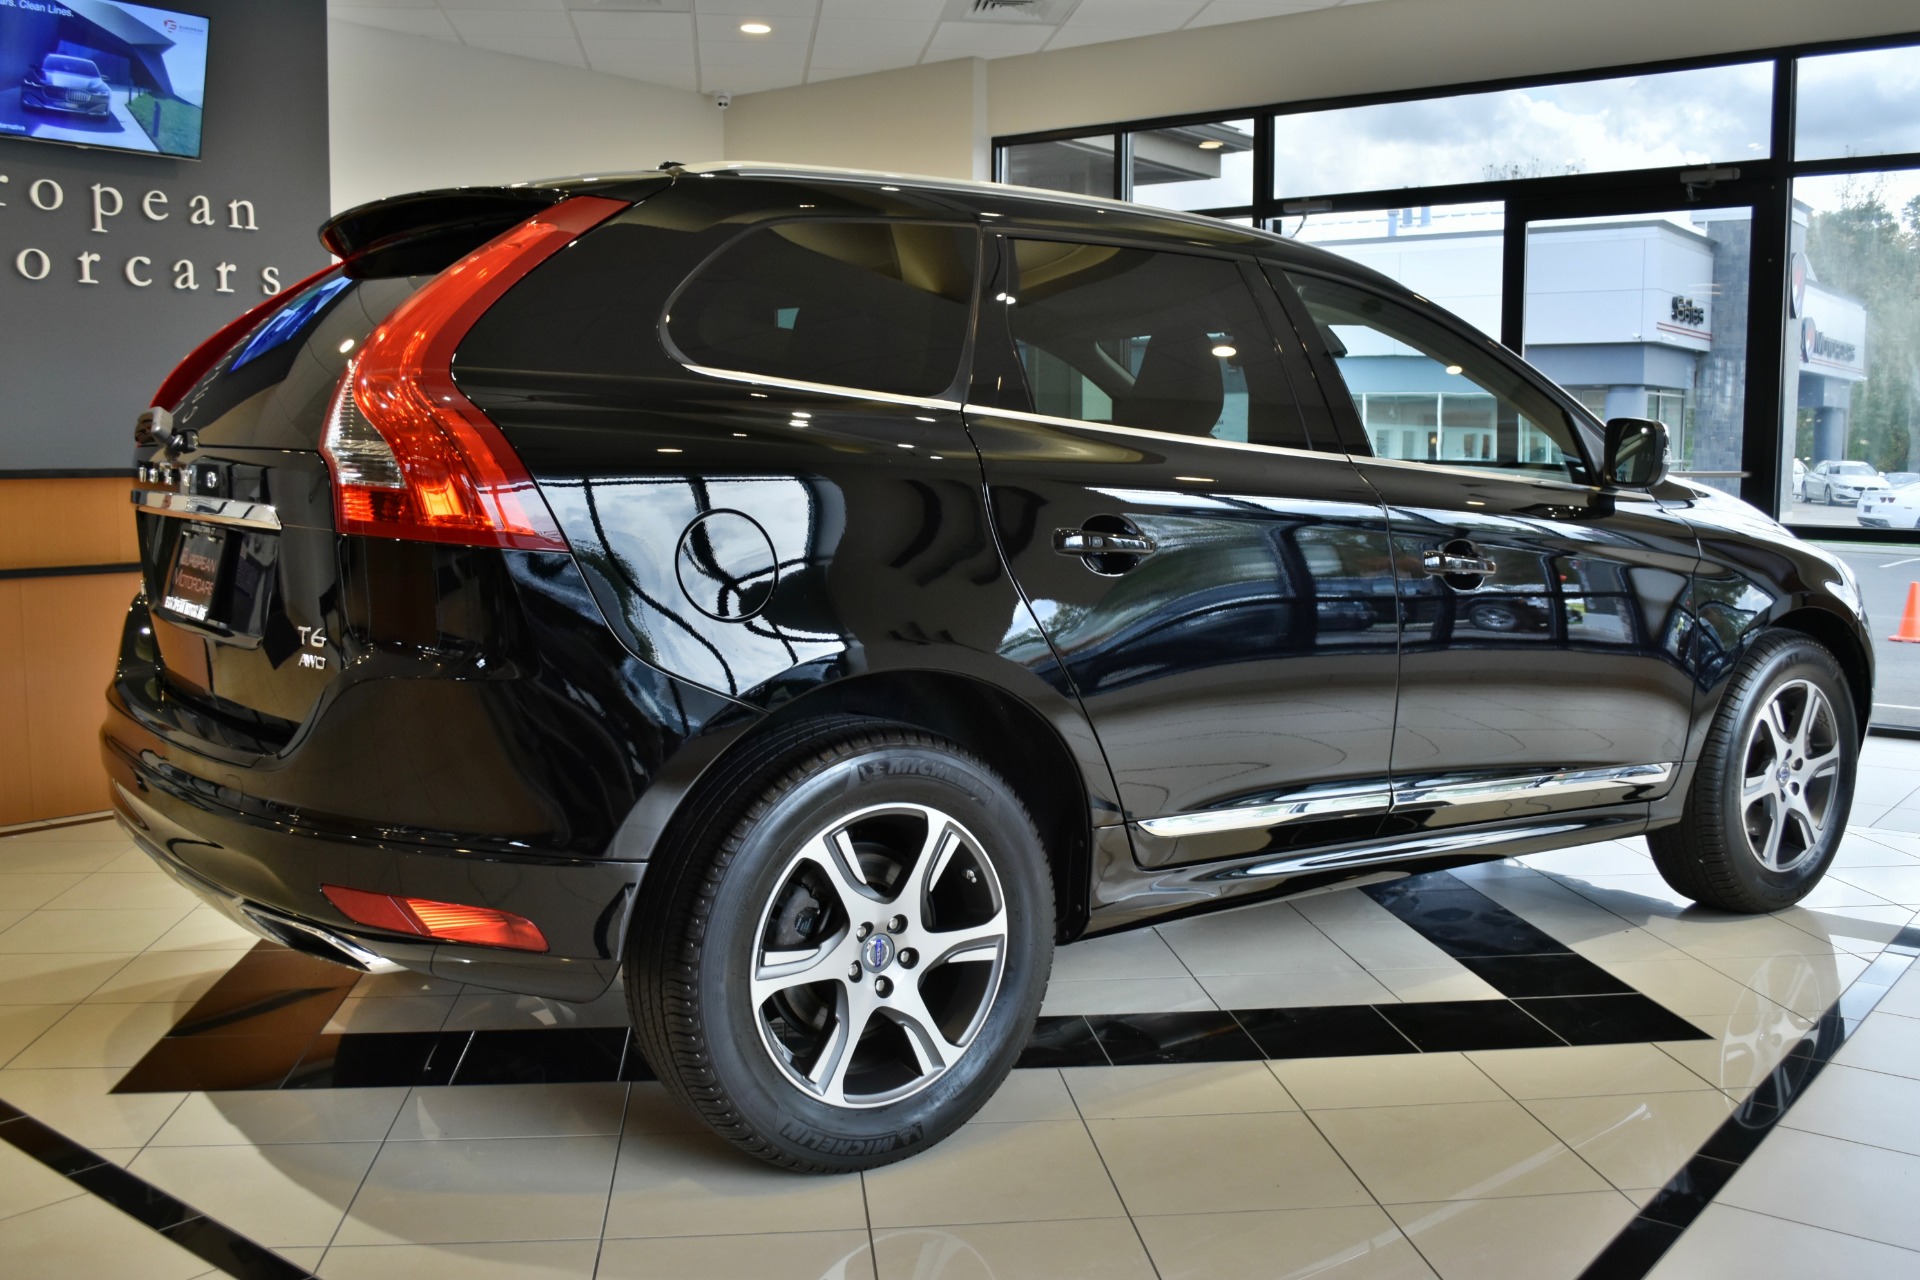 2015 Volvo XC60 T6 for sale near Middletown, CT | CT Volvo Dealer